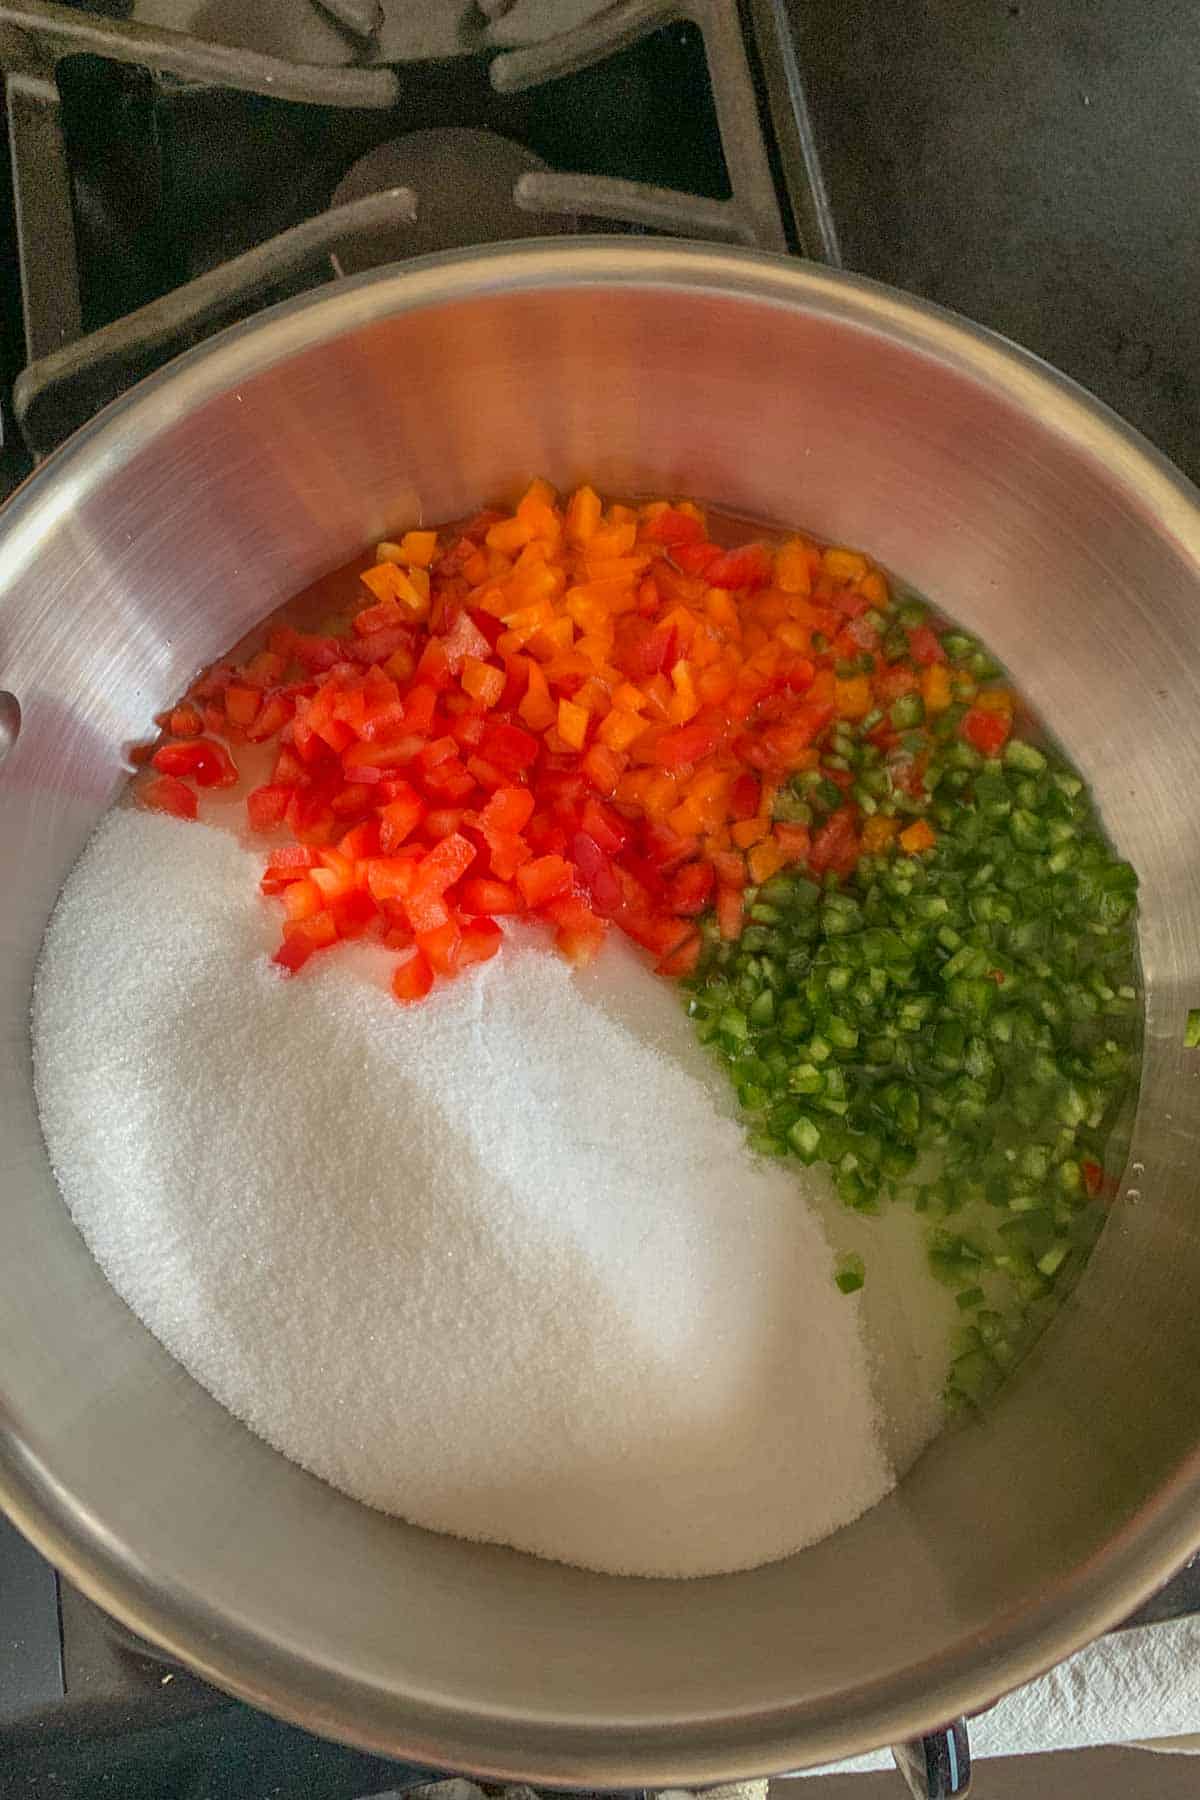 Sugar, jalapeños, bell peppers, and vinegar in a stainless pan.